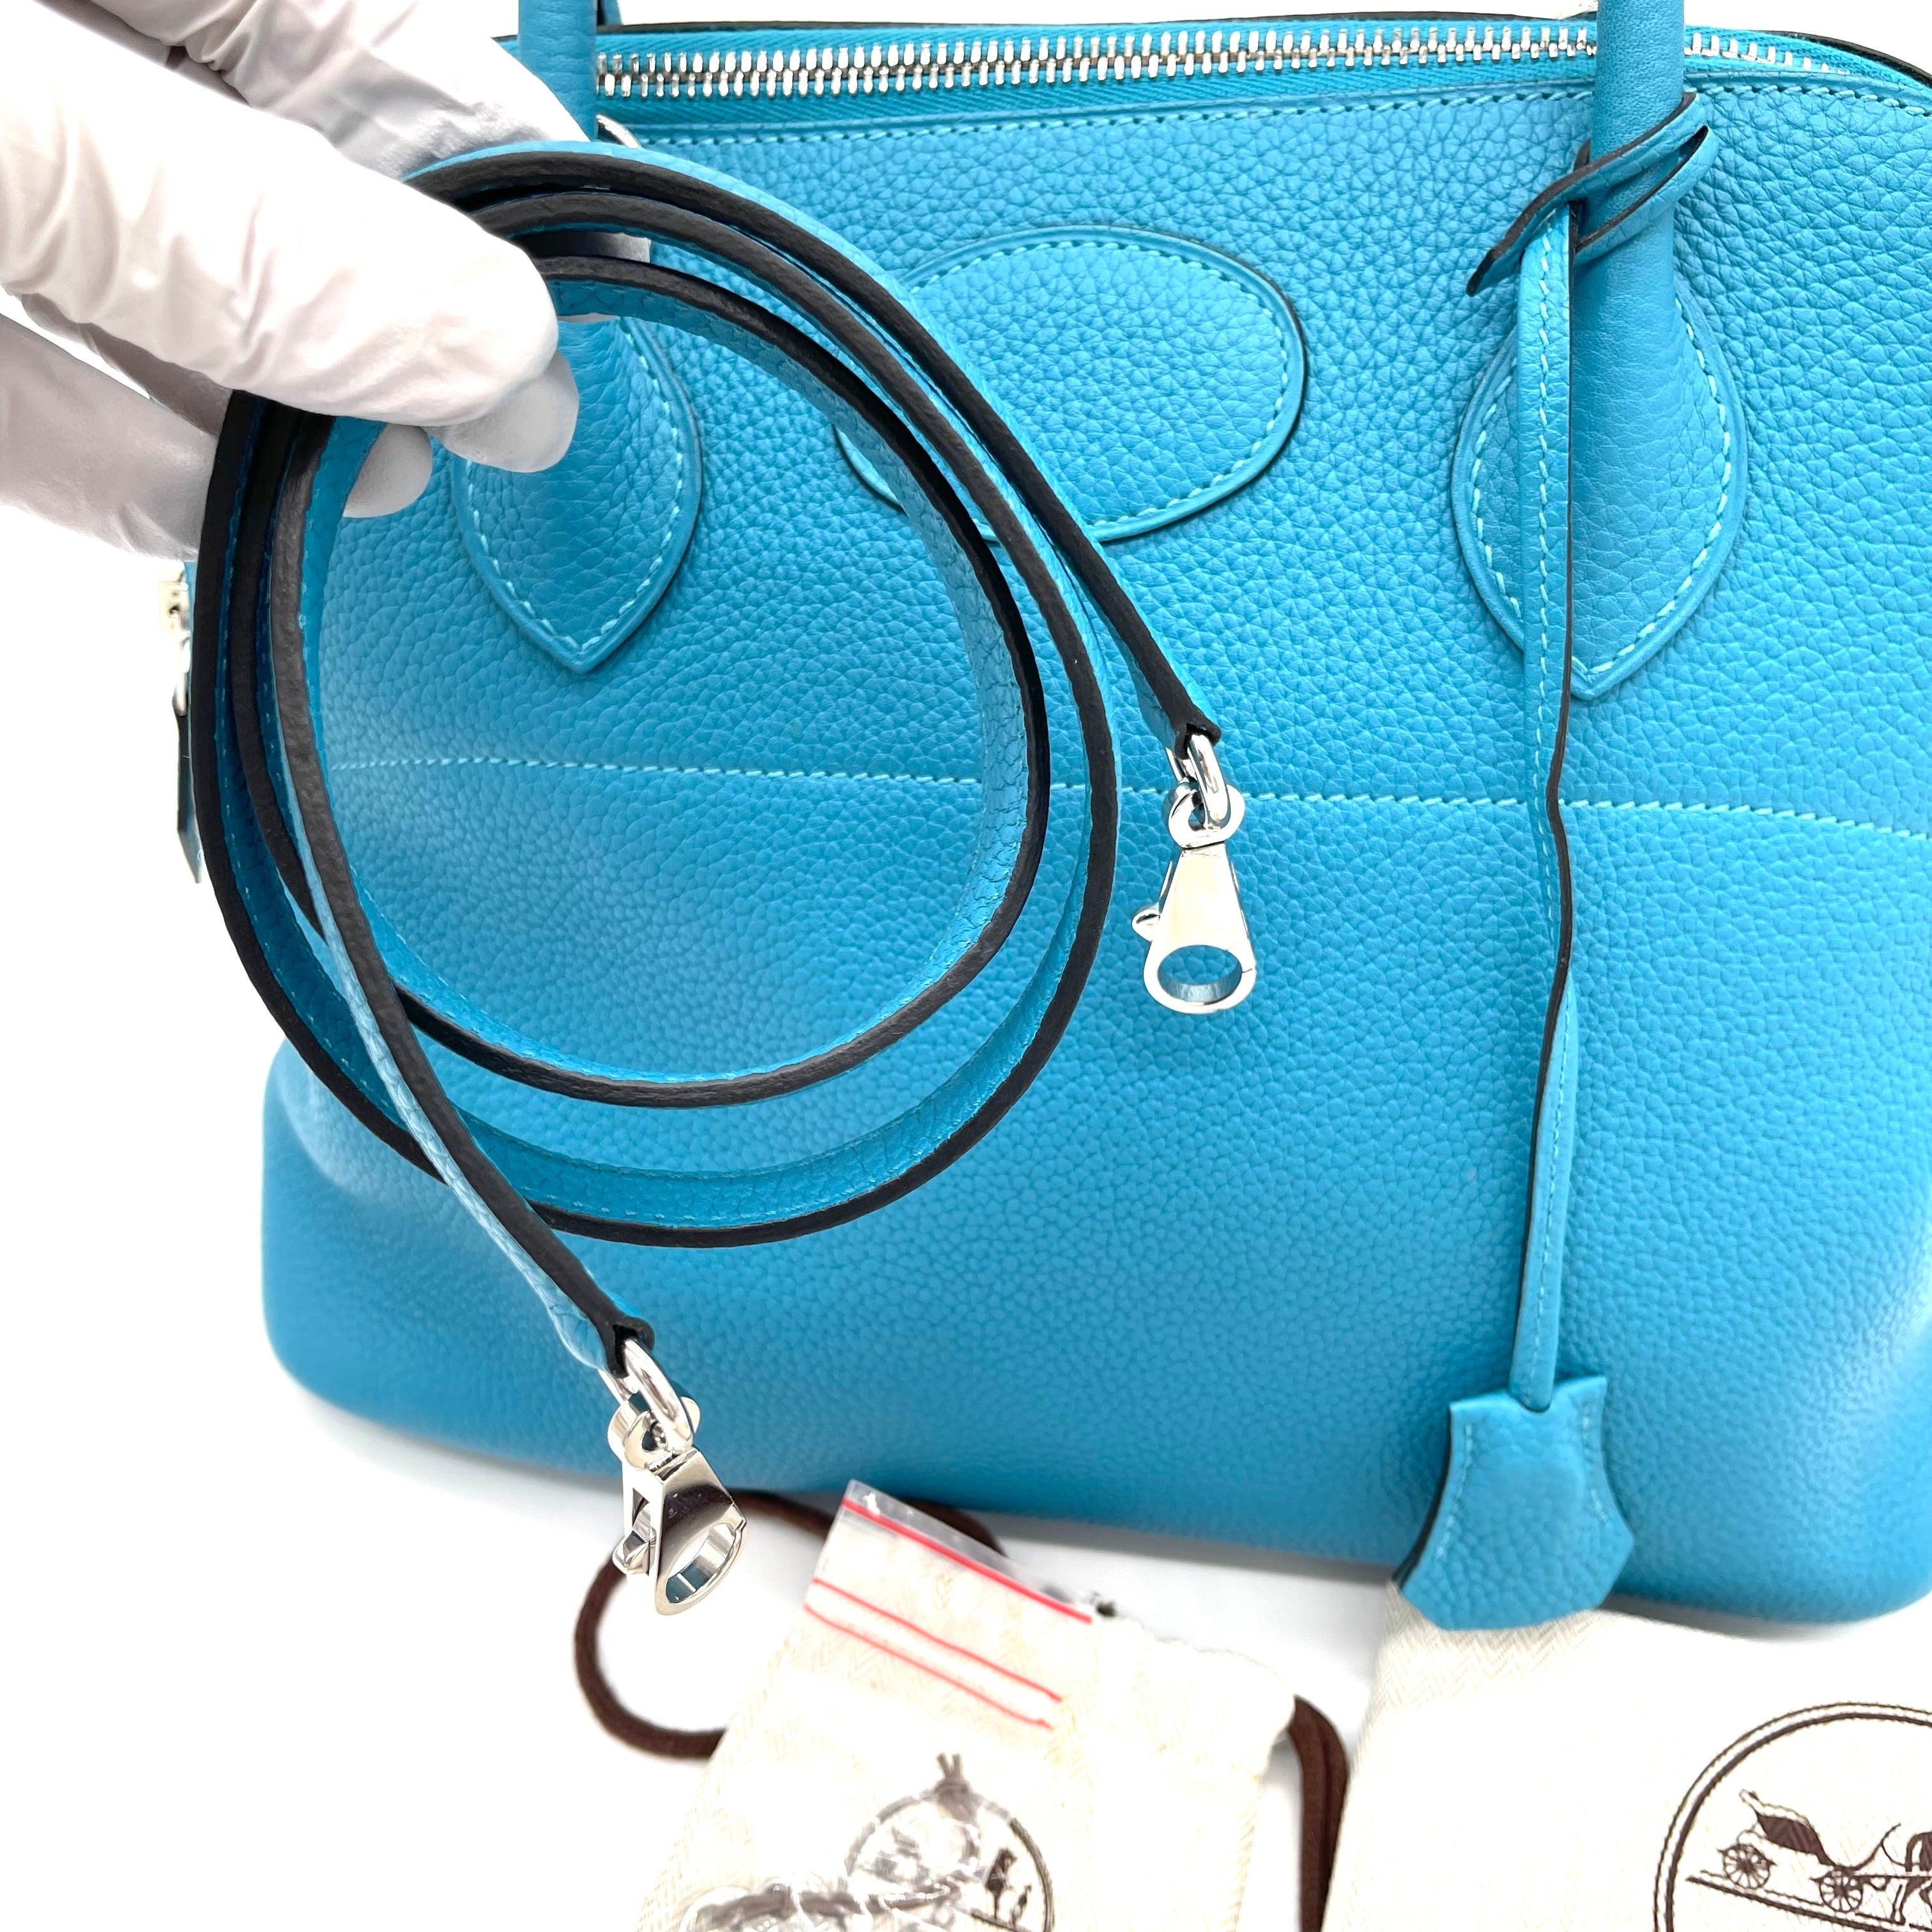 HERMES Taurillon Clemence Bolide 31 Turquoise